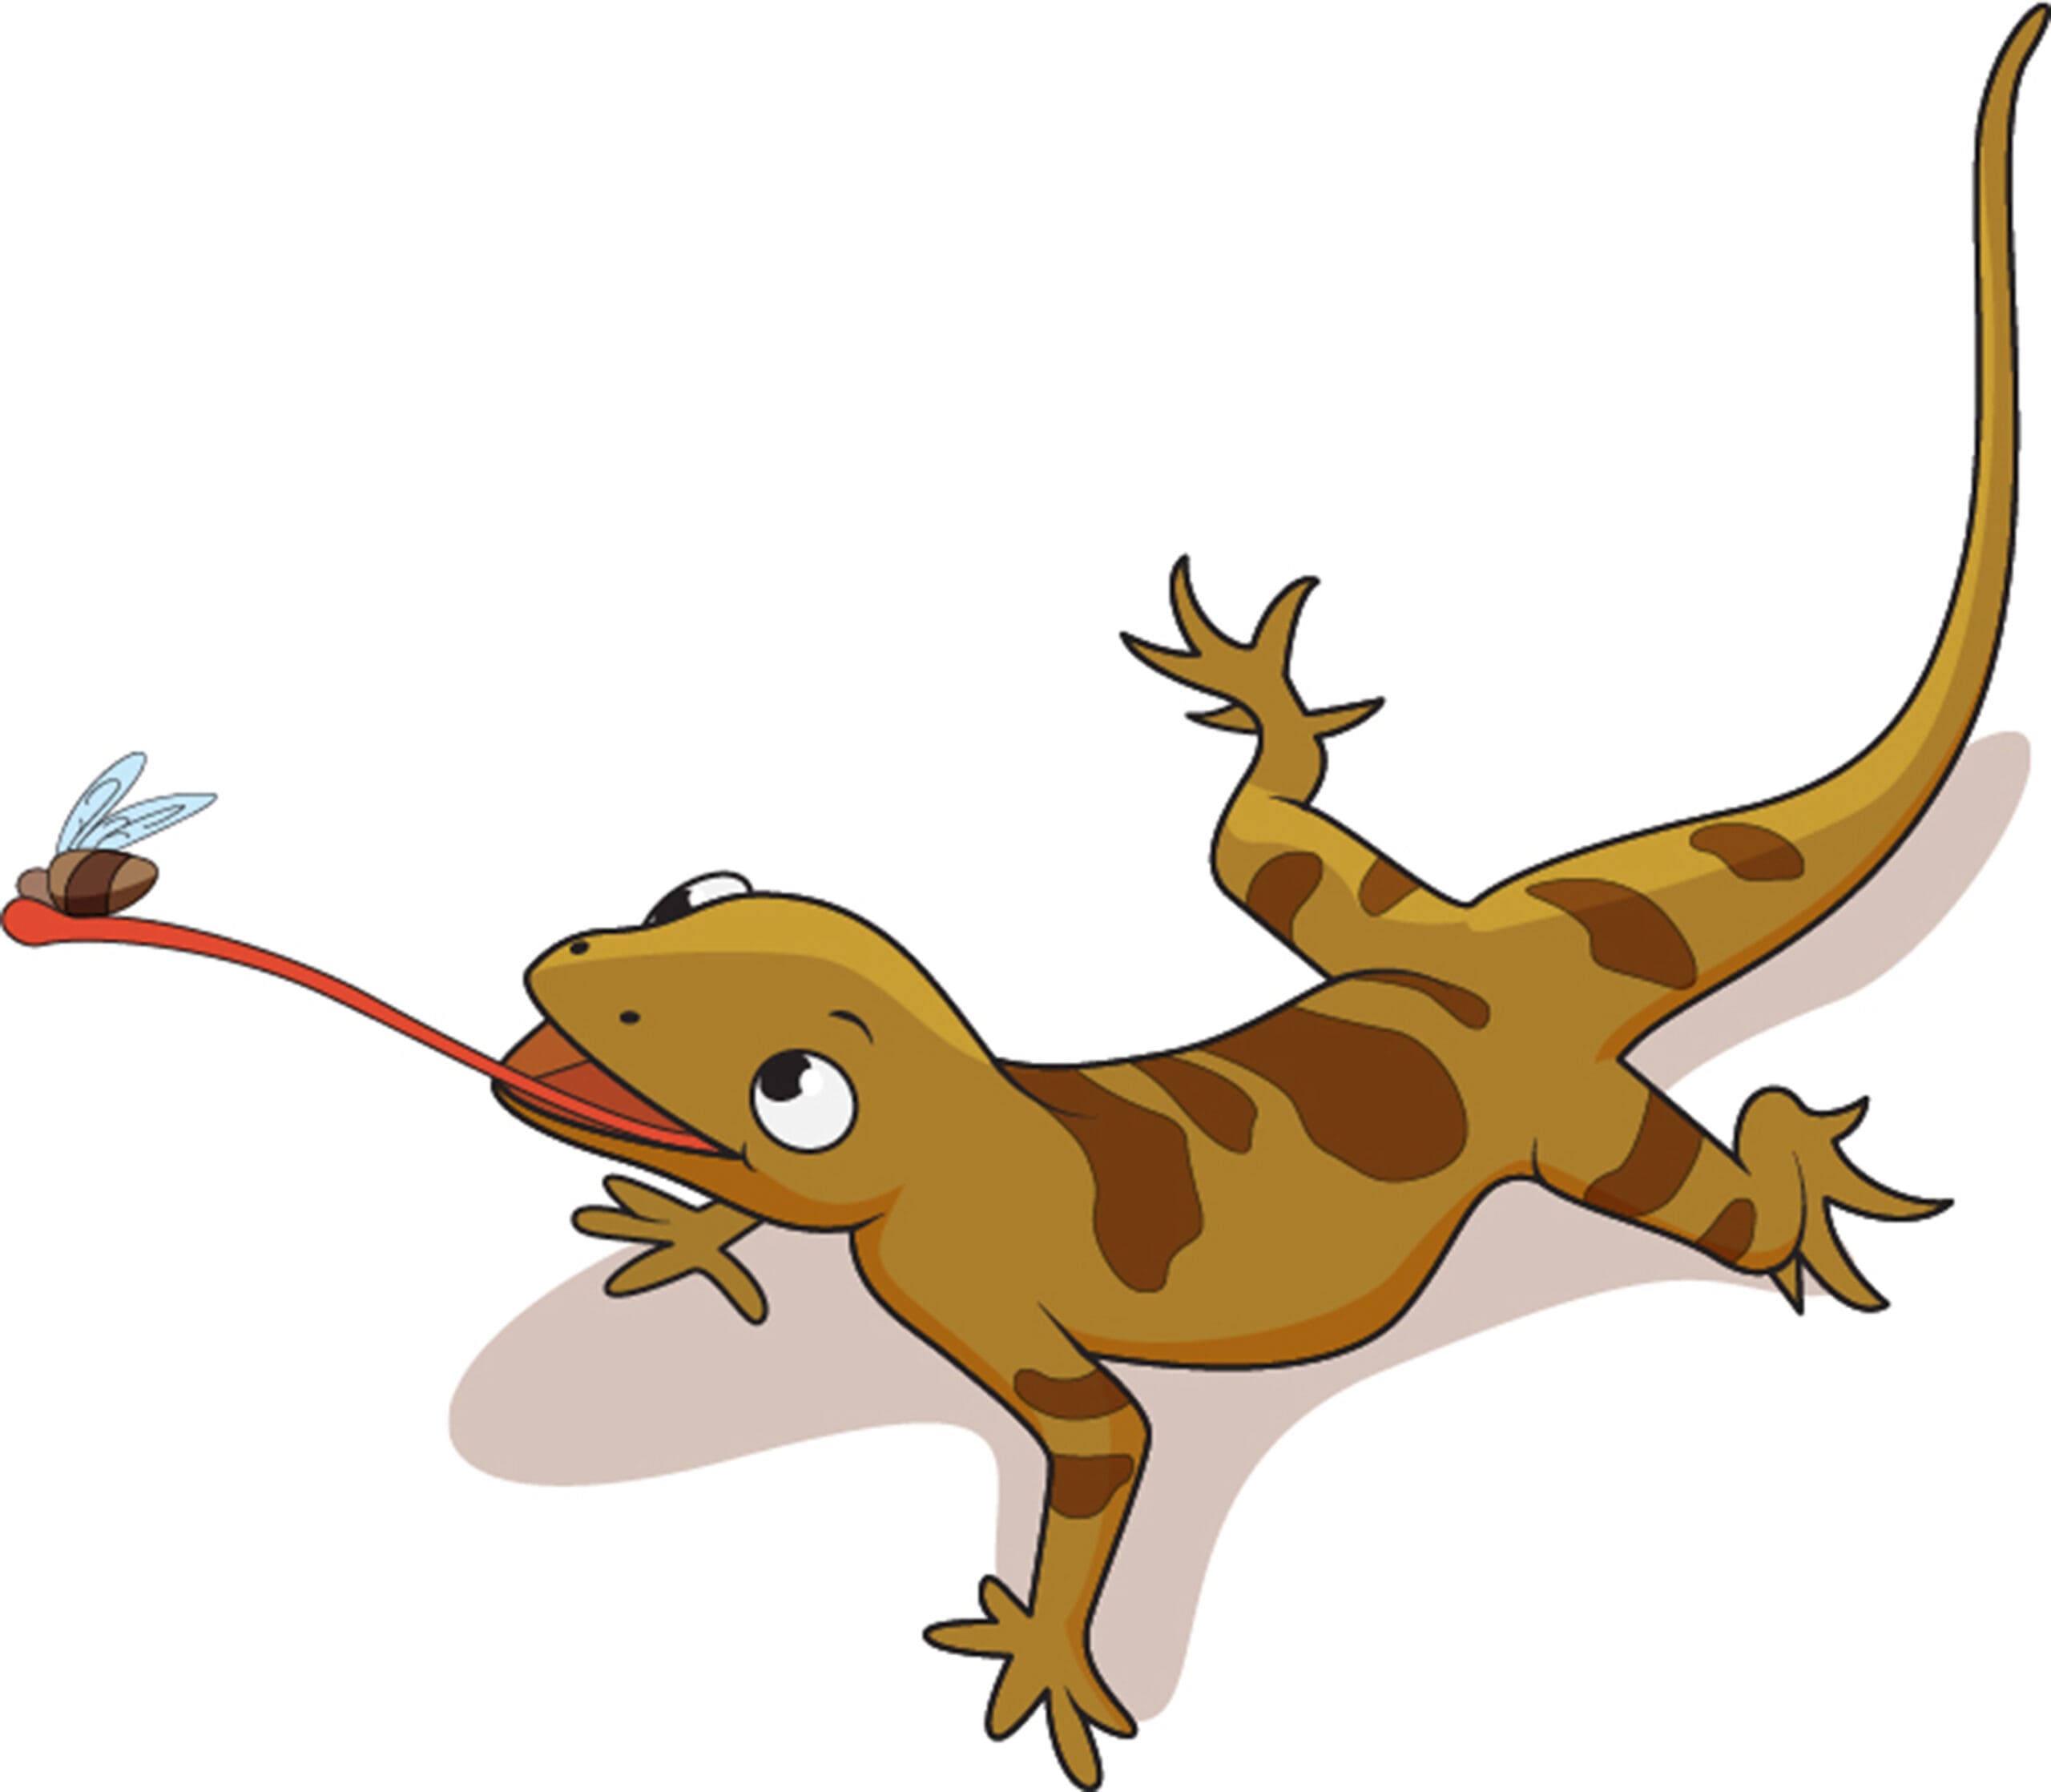 lizard catching insect with its long tongue vector illustration scaled